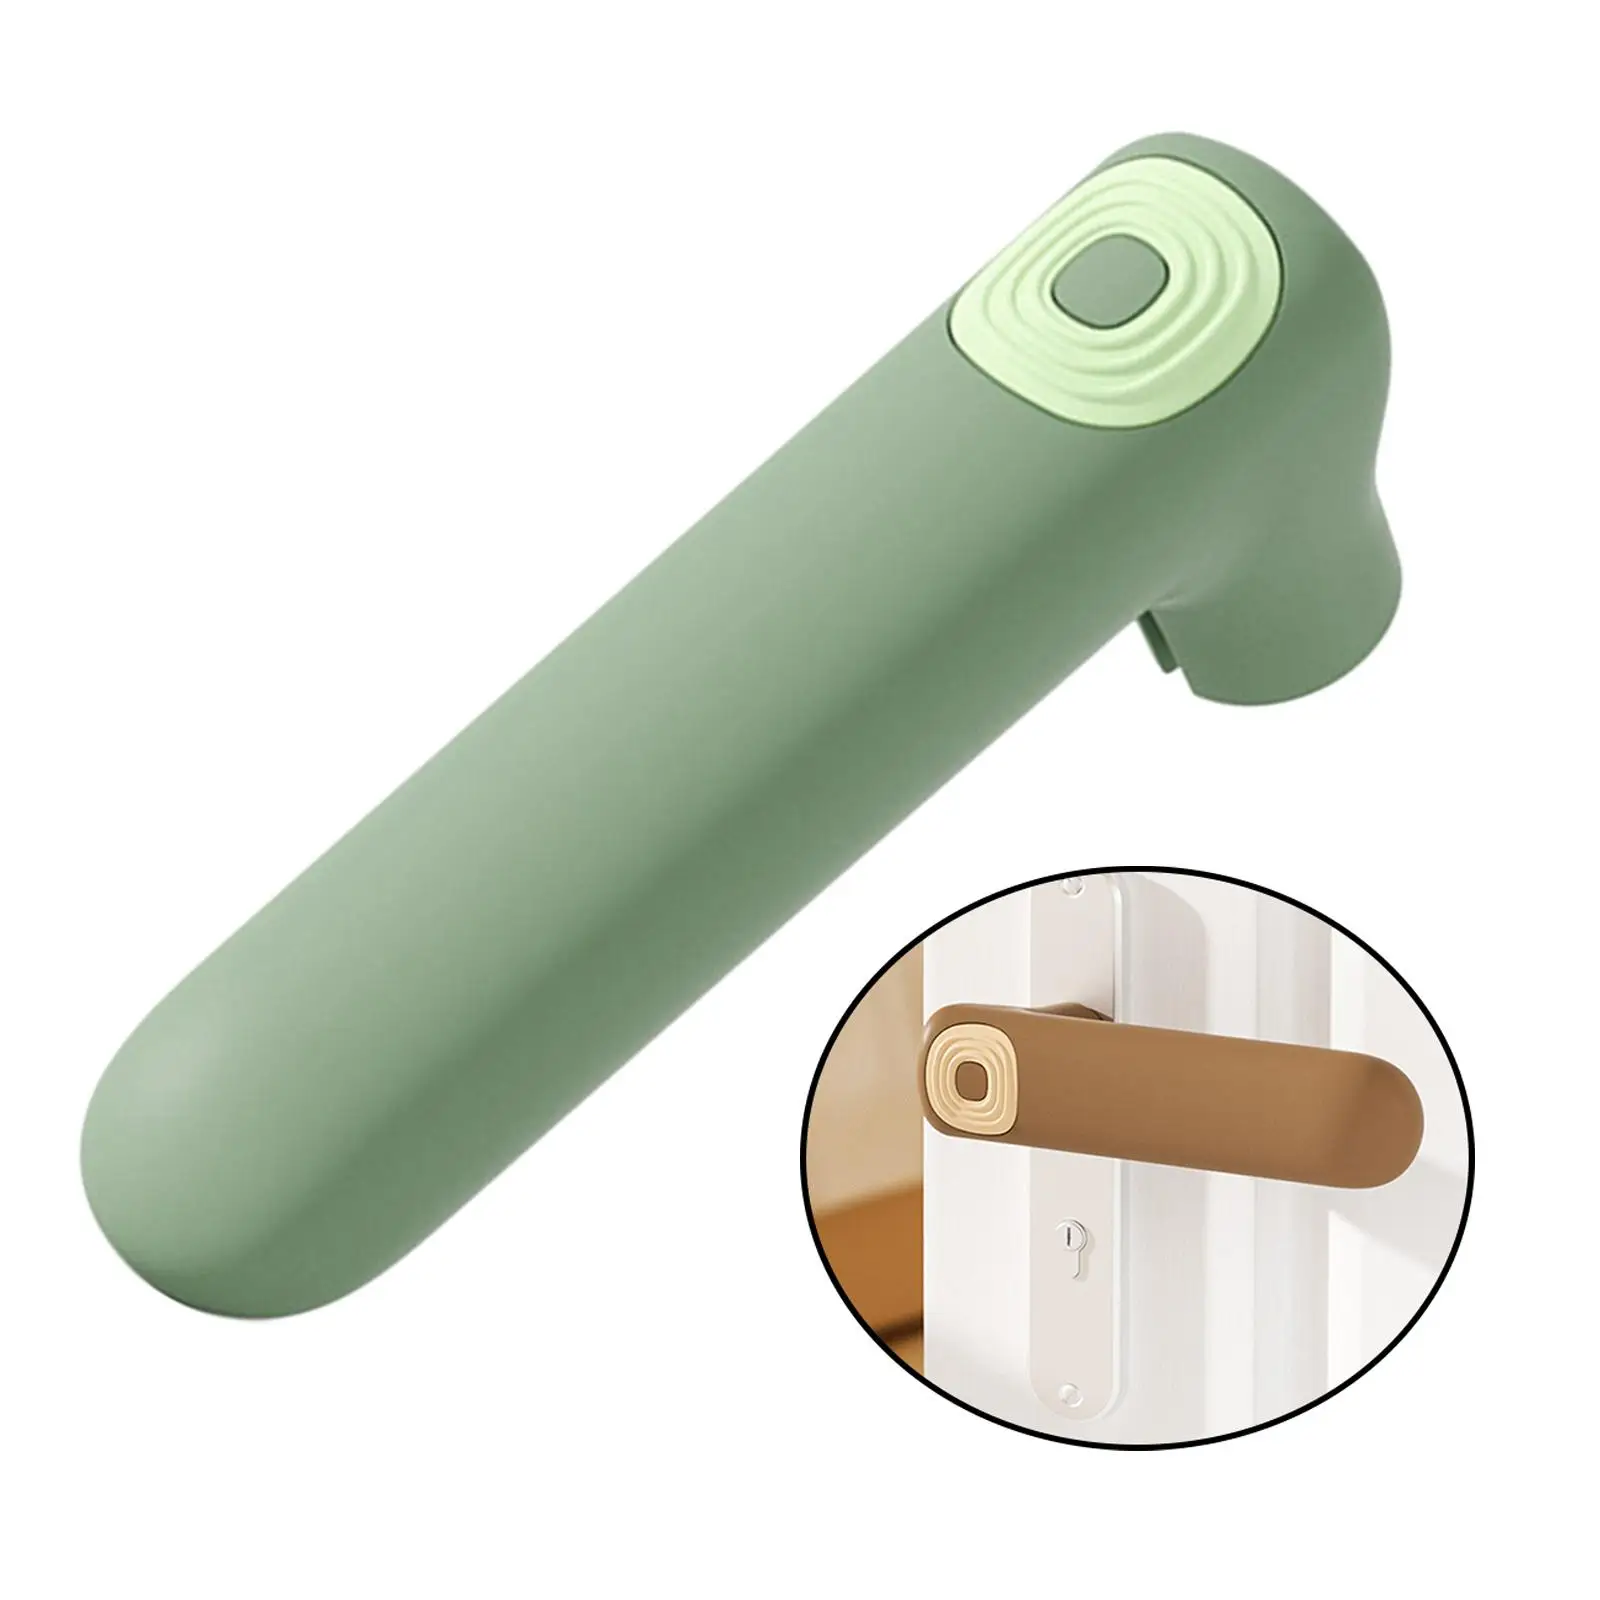 Silicone handle for door Cover Knob Cover Gloves Guard Sleeve handle for door Protector for Living Room Bedroom Home